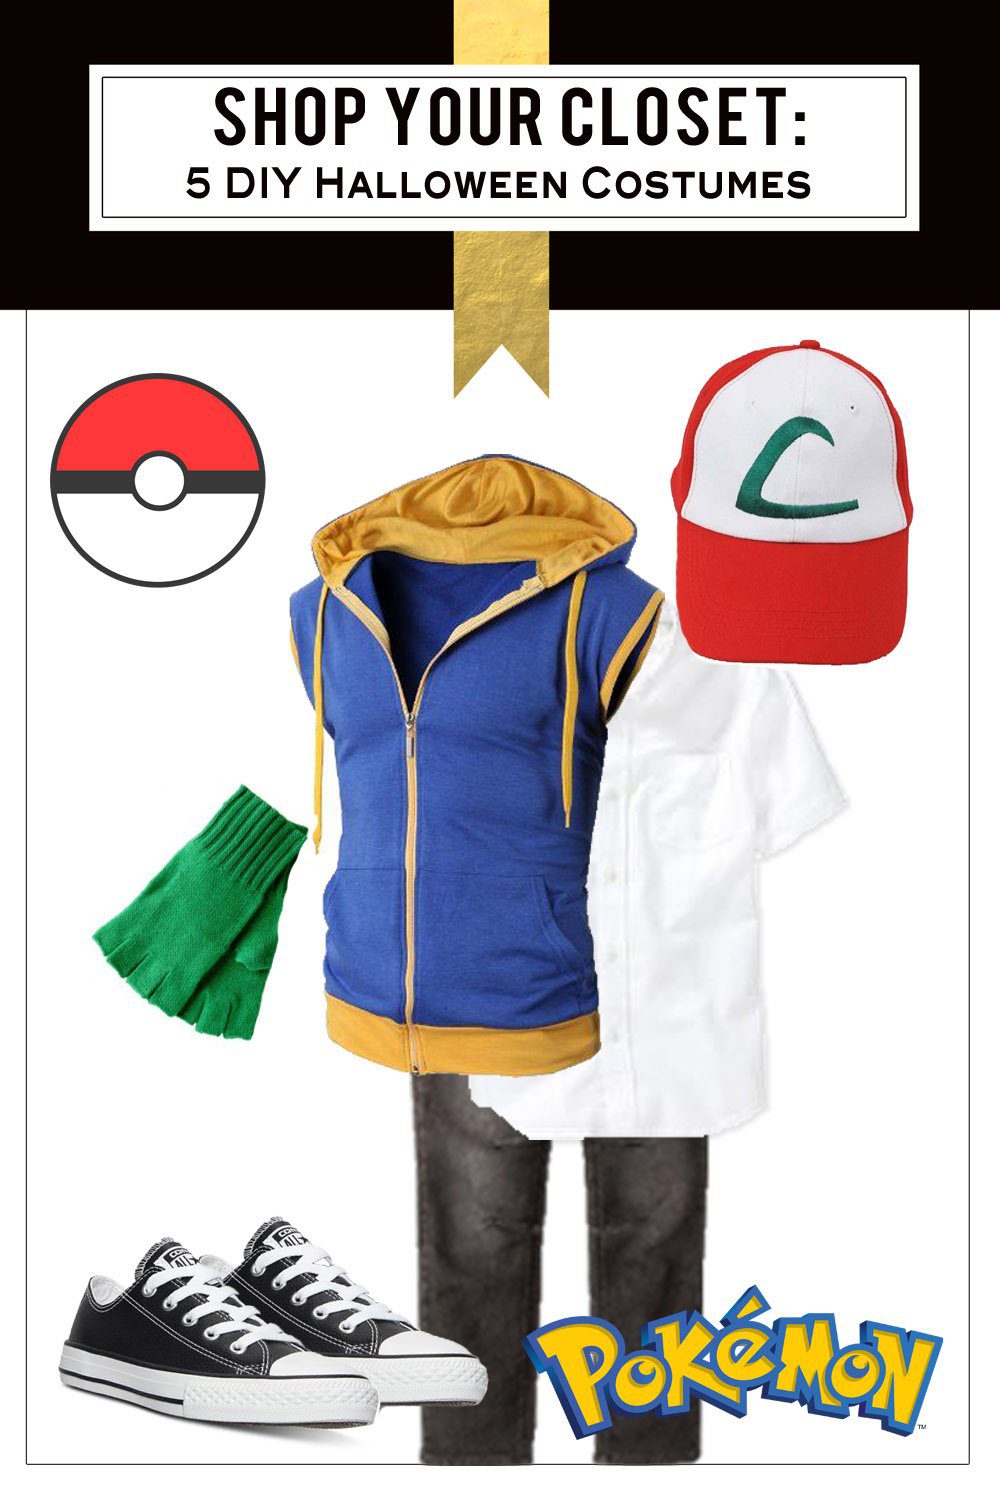 Shop Your Closet for Halloween: 5 Free and Fabulous Costumes Pokemon Ash Ketchum, Suicide Squad Harley Quinn, Game of Thrones Shae and Khaleesi, Happy Love Cat Emoji | Five Marigolds